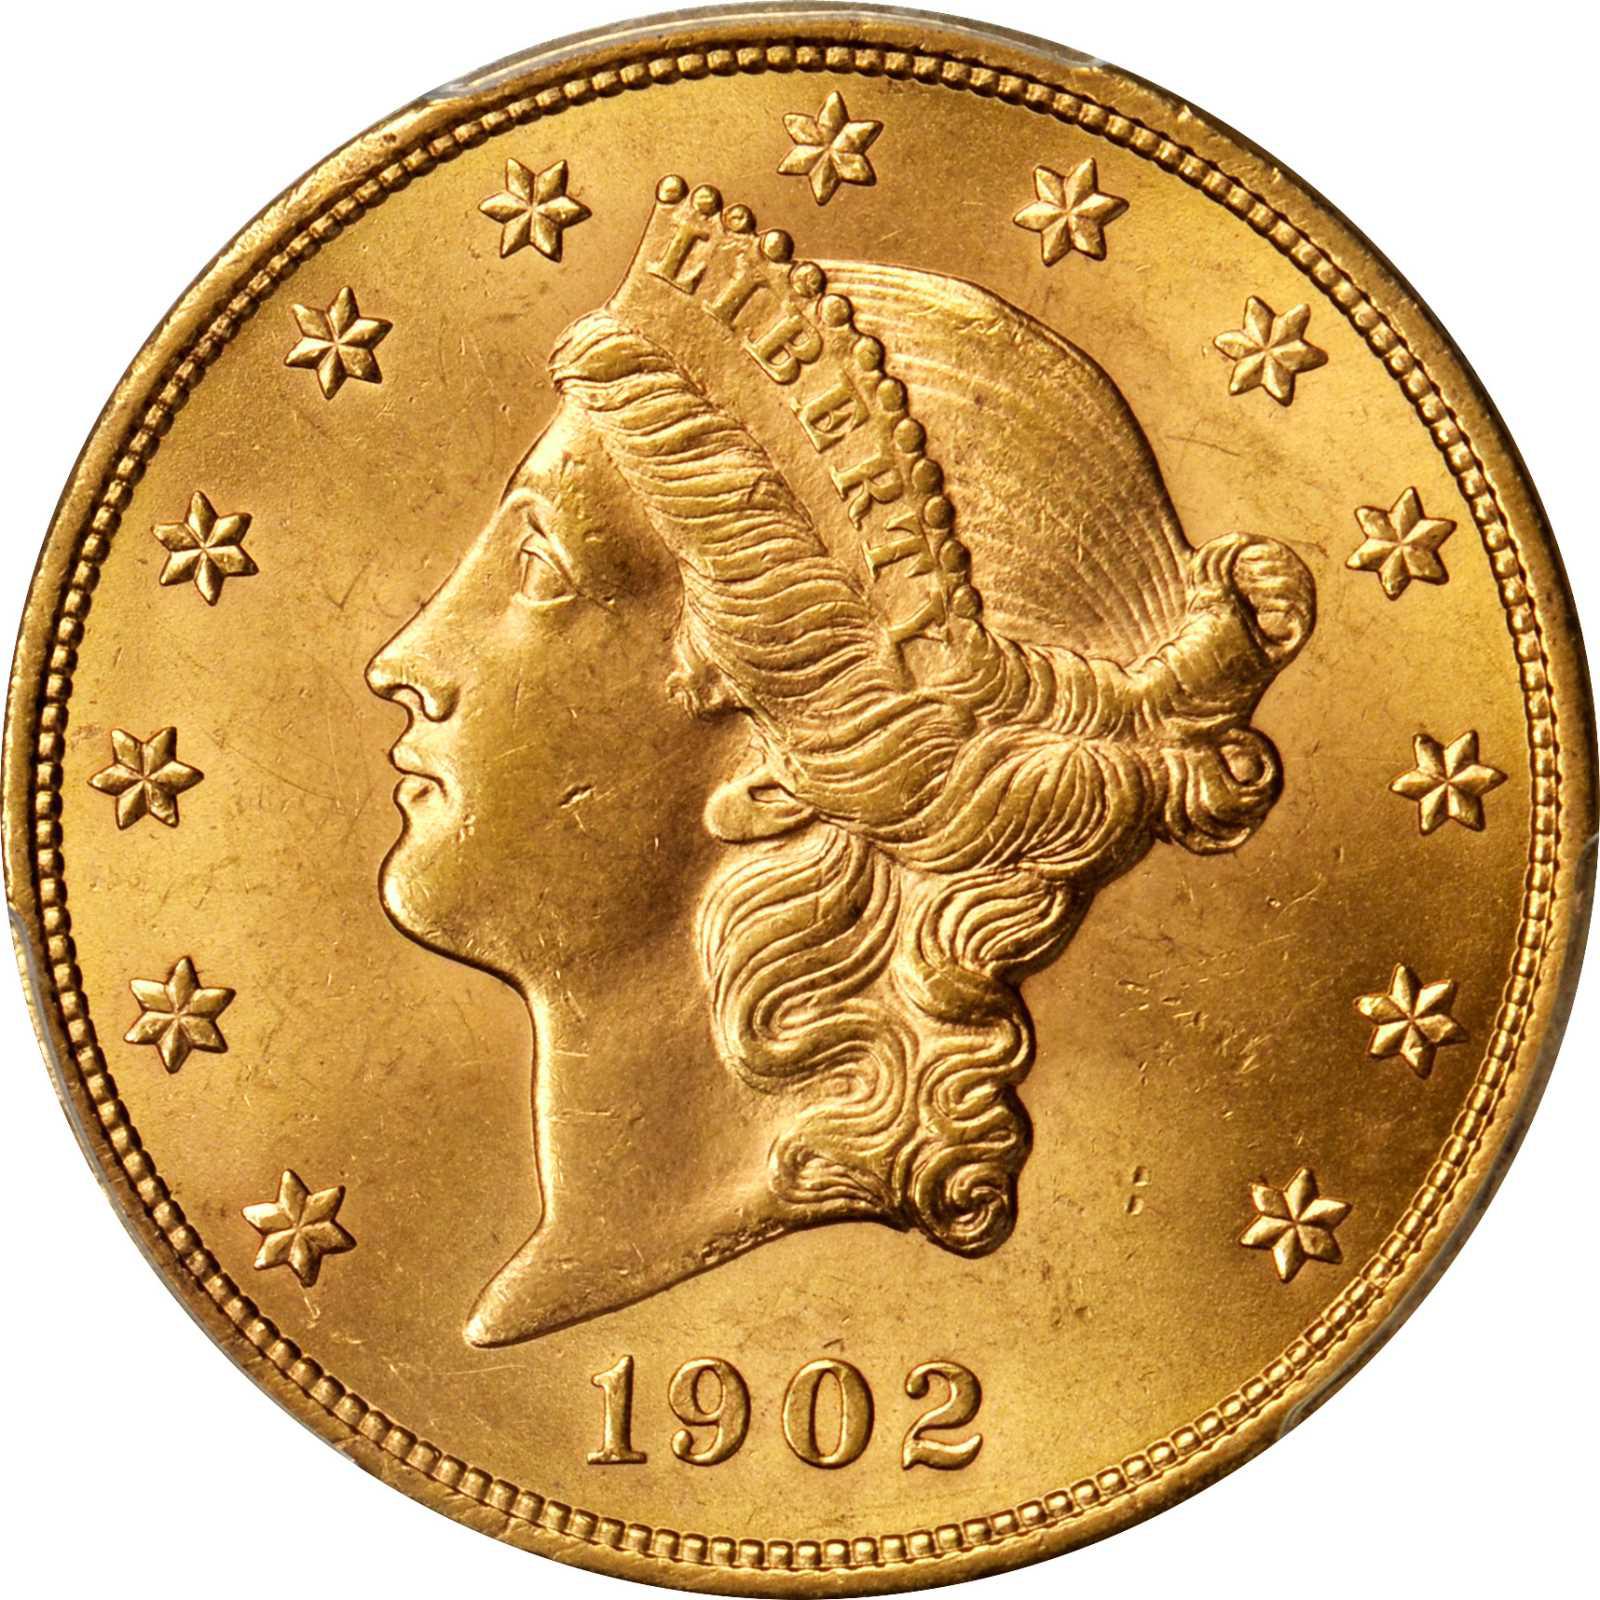 29 Coins That Are Worth Money